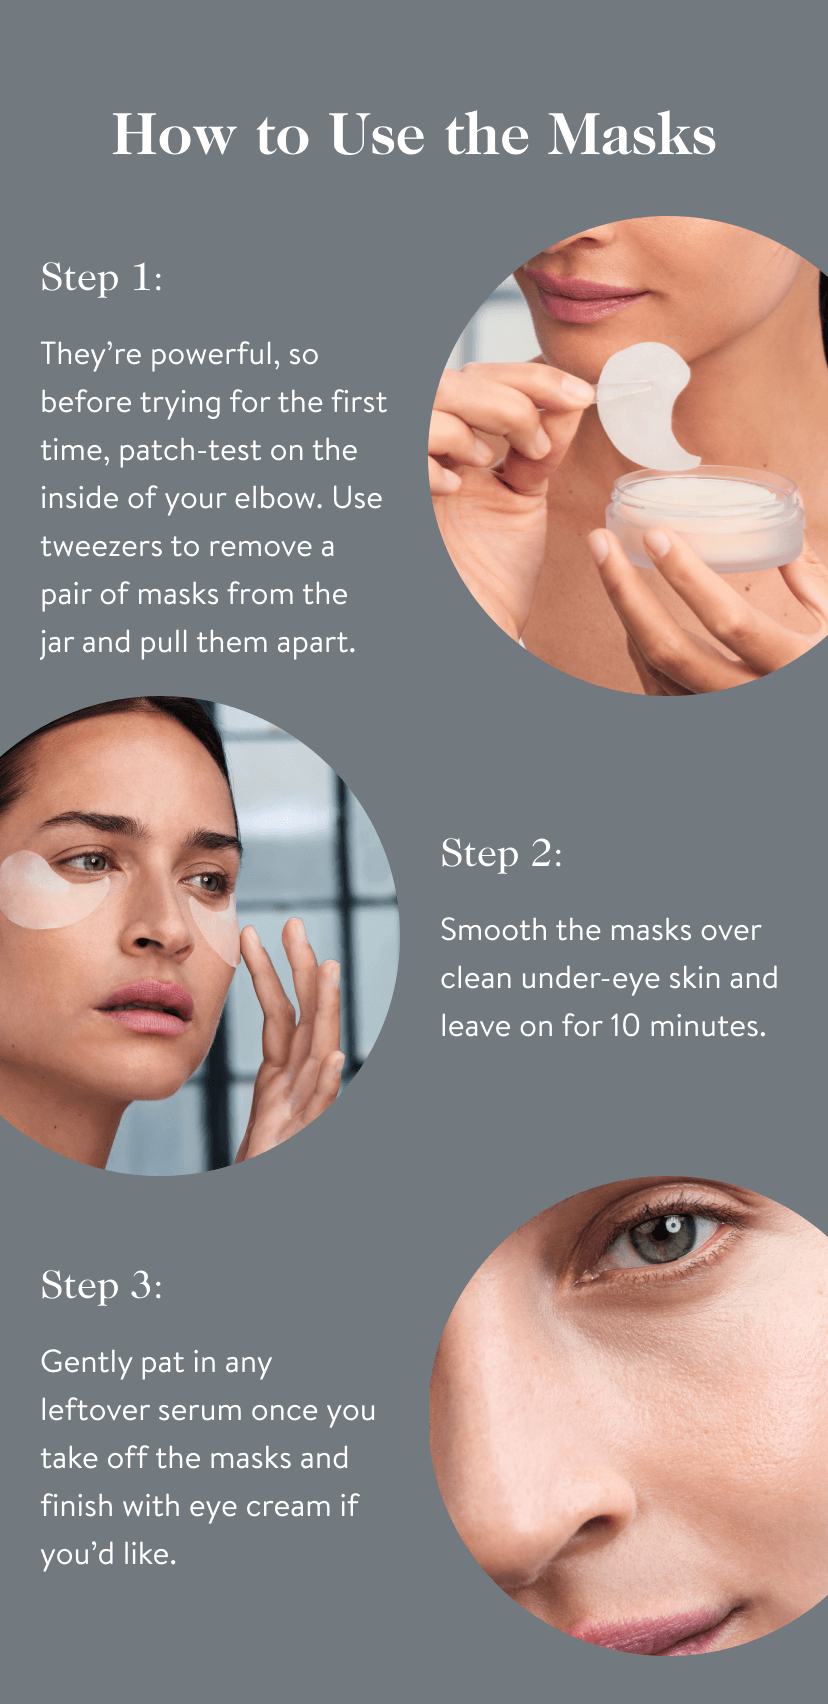 how to use the masks